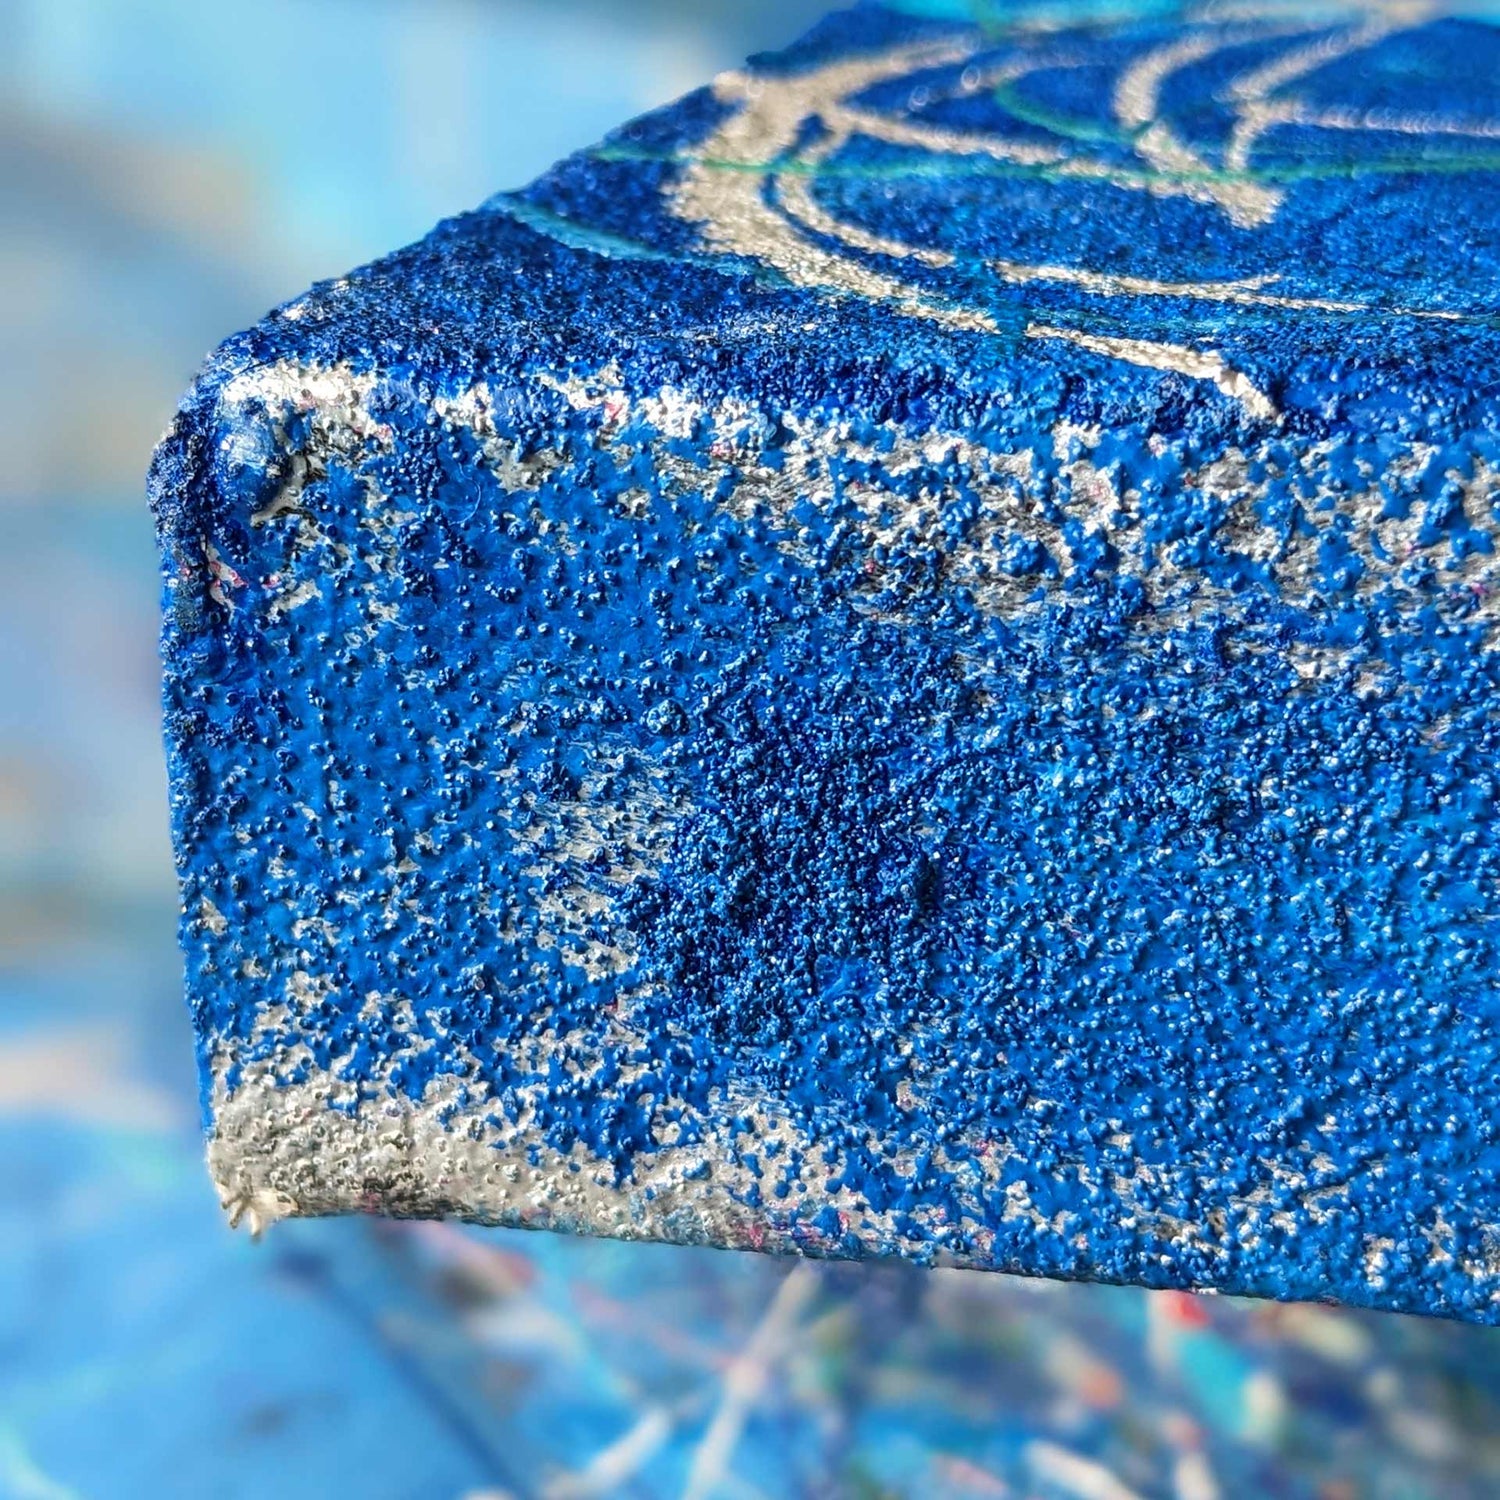 Close up detail of the blue and silver surface of the Music Art painting 'G Major V' by the artist Zeitwarp